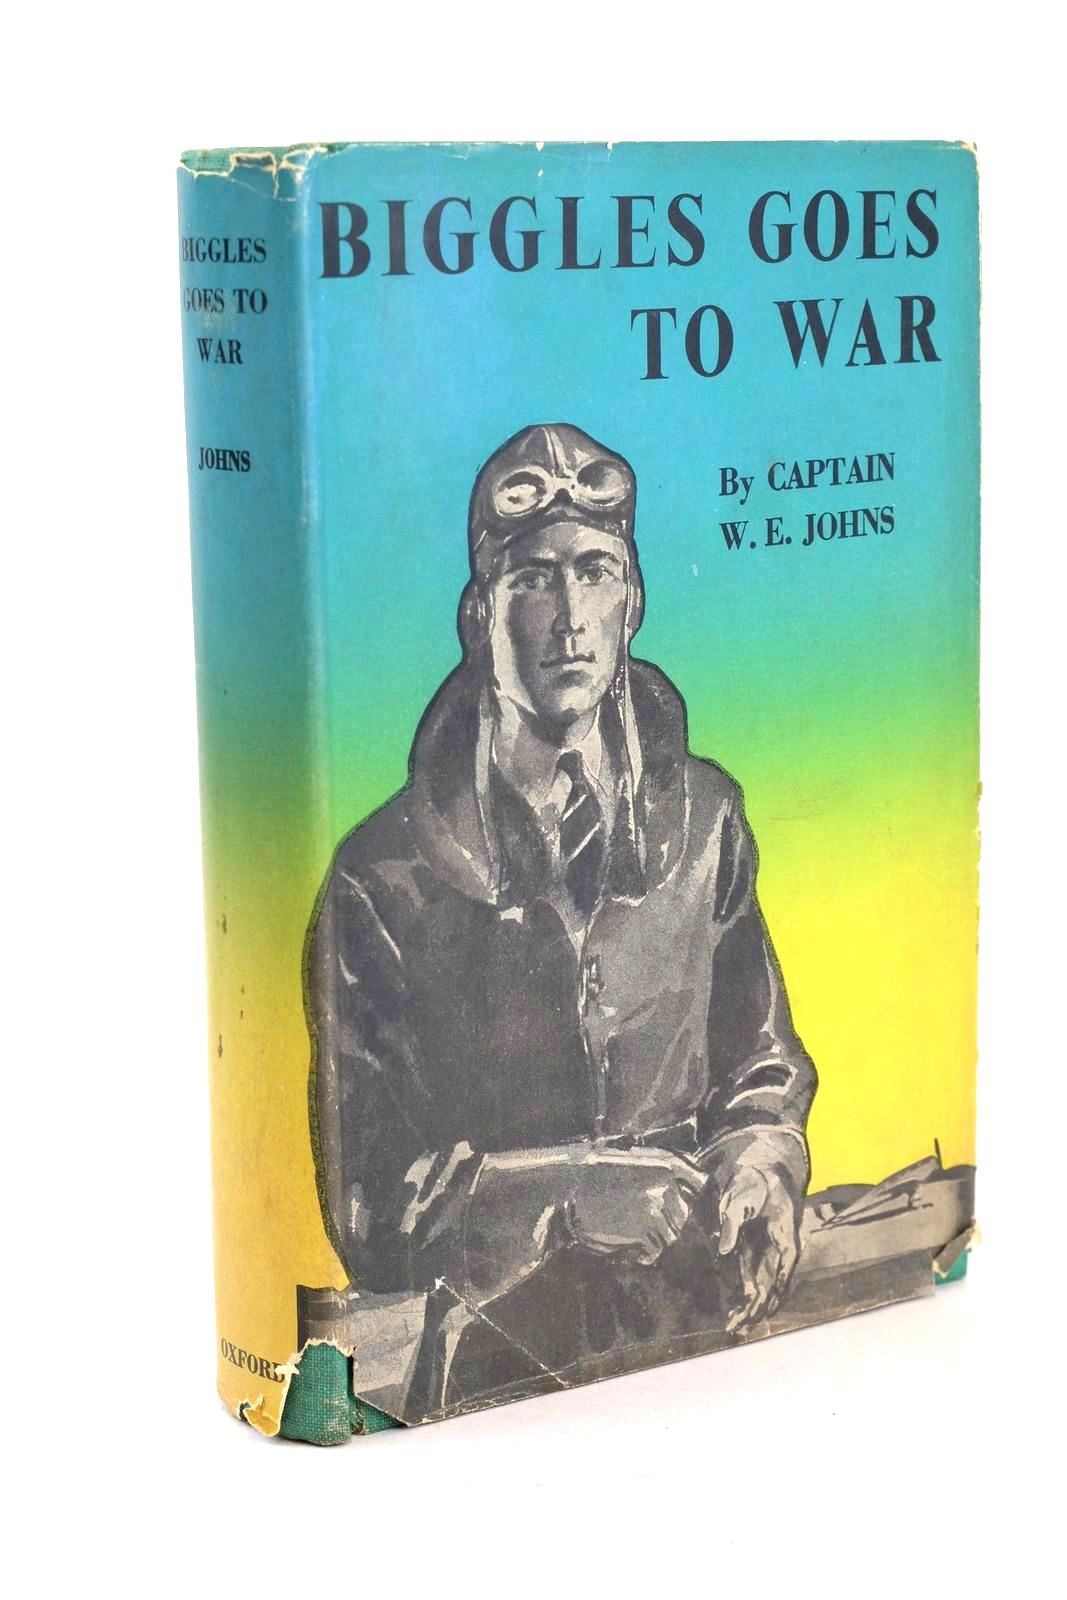 Photo of BIGGLES GOES TO WAR written by Johns, W.E. illustrated by Tyas, Martin published by Oxford University Press, Geoffrey Cumberlege (STOCK CODE: 1326286)  for sale by Stella & Rose's Books